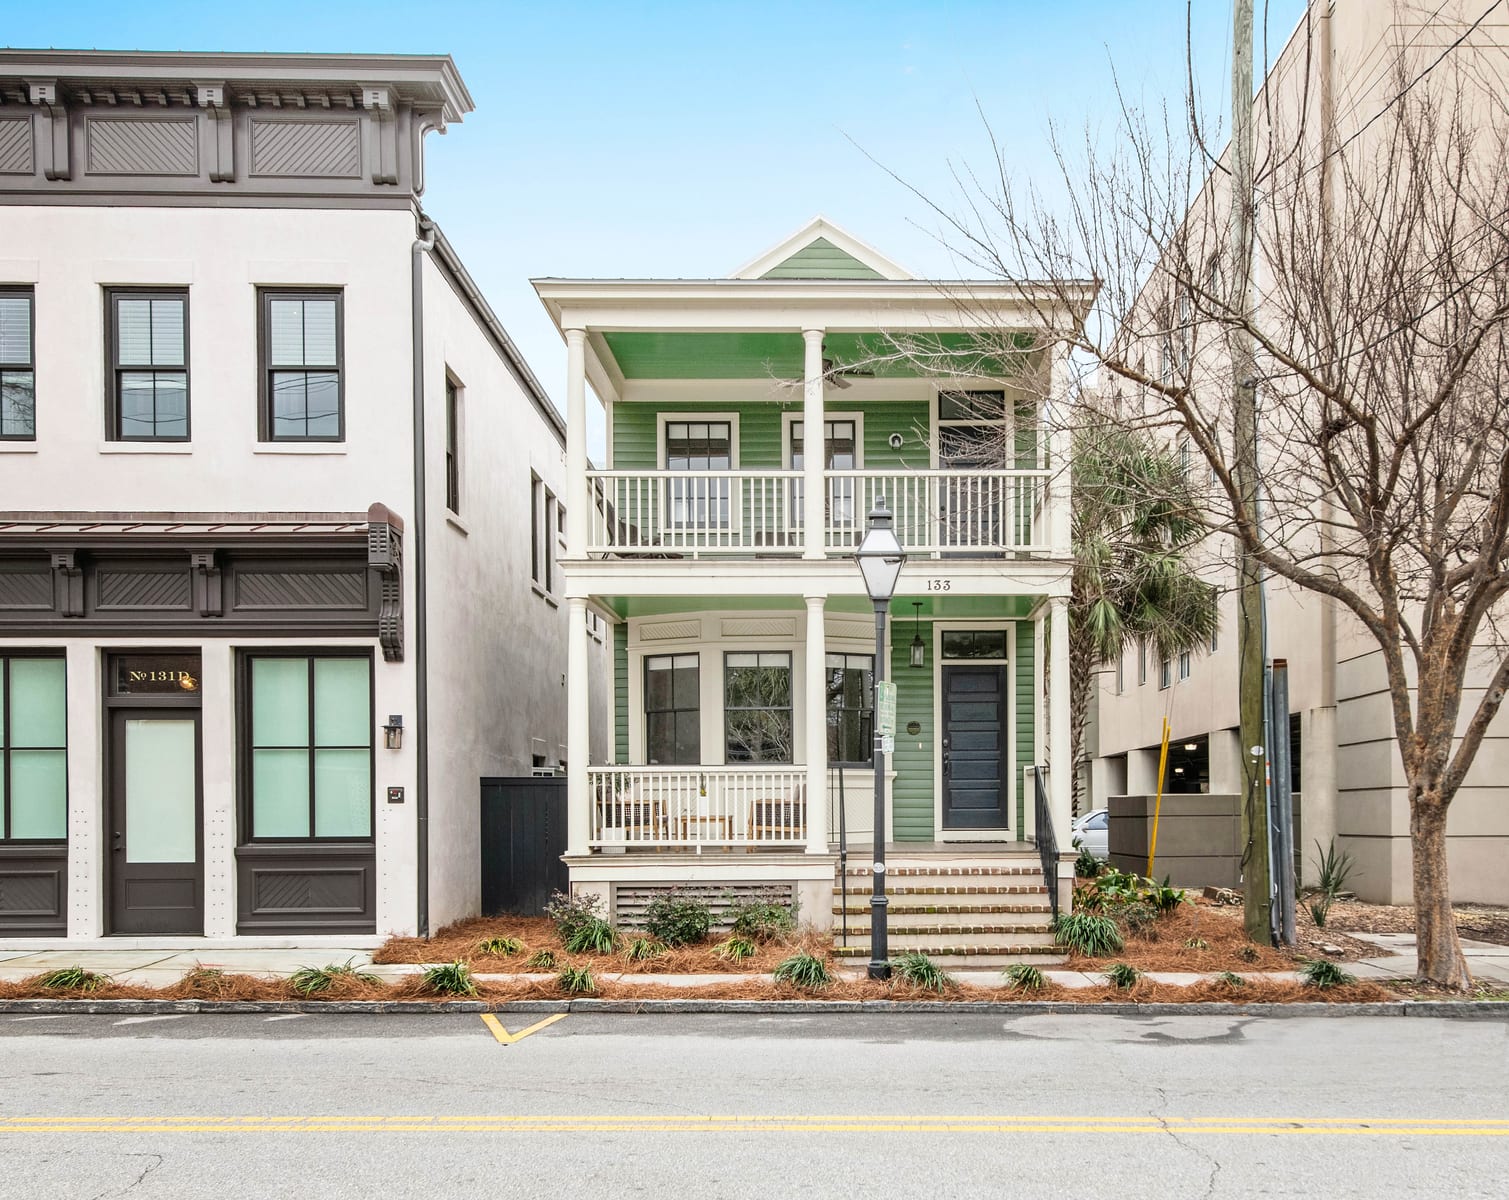 Welcome to your downtown charleston rental! Explore all things downtown by foot!